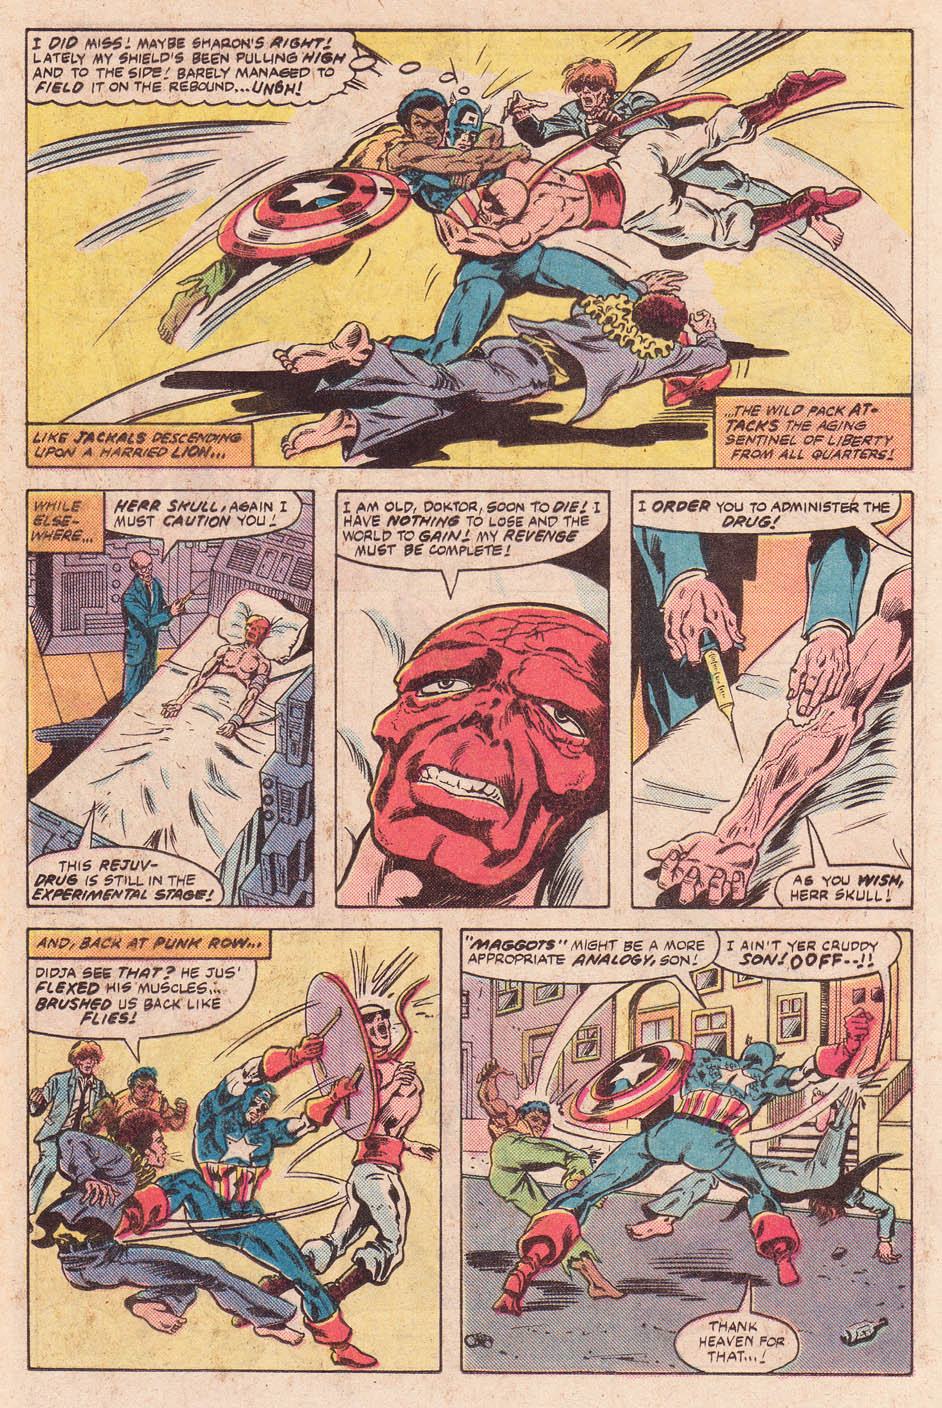 What If? (1977) issue 38 - Daredevil and Captain America - Page 20